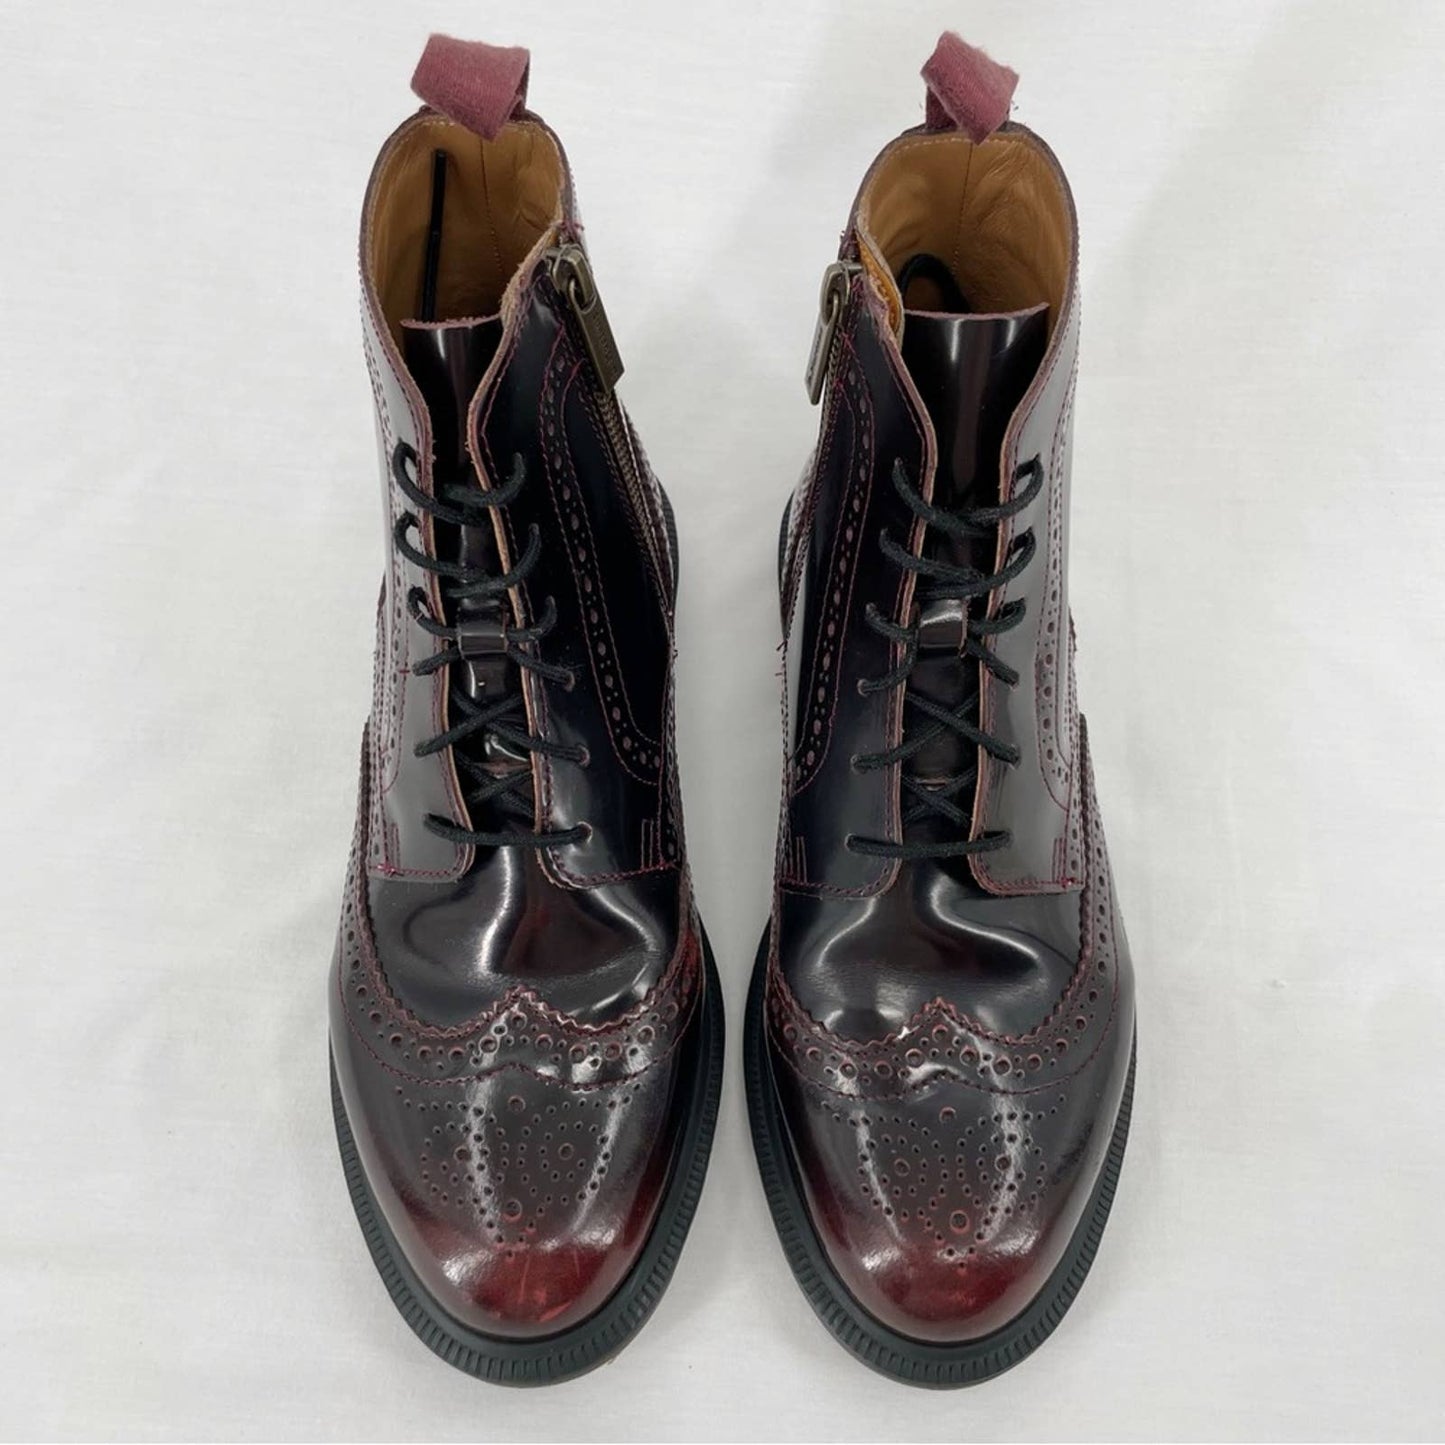 Dr. Martens Delphine Dress Boots Cherry Red Arcadia Leather Brogue Oxford Style Size 8